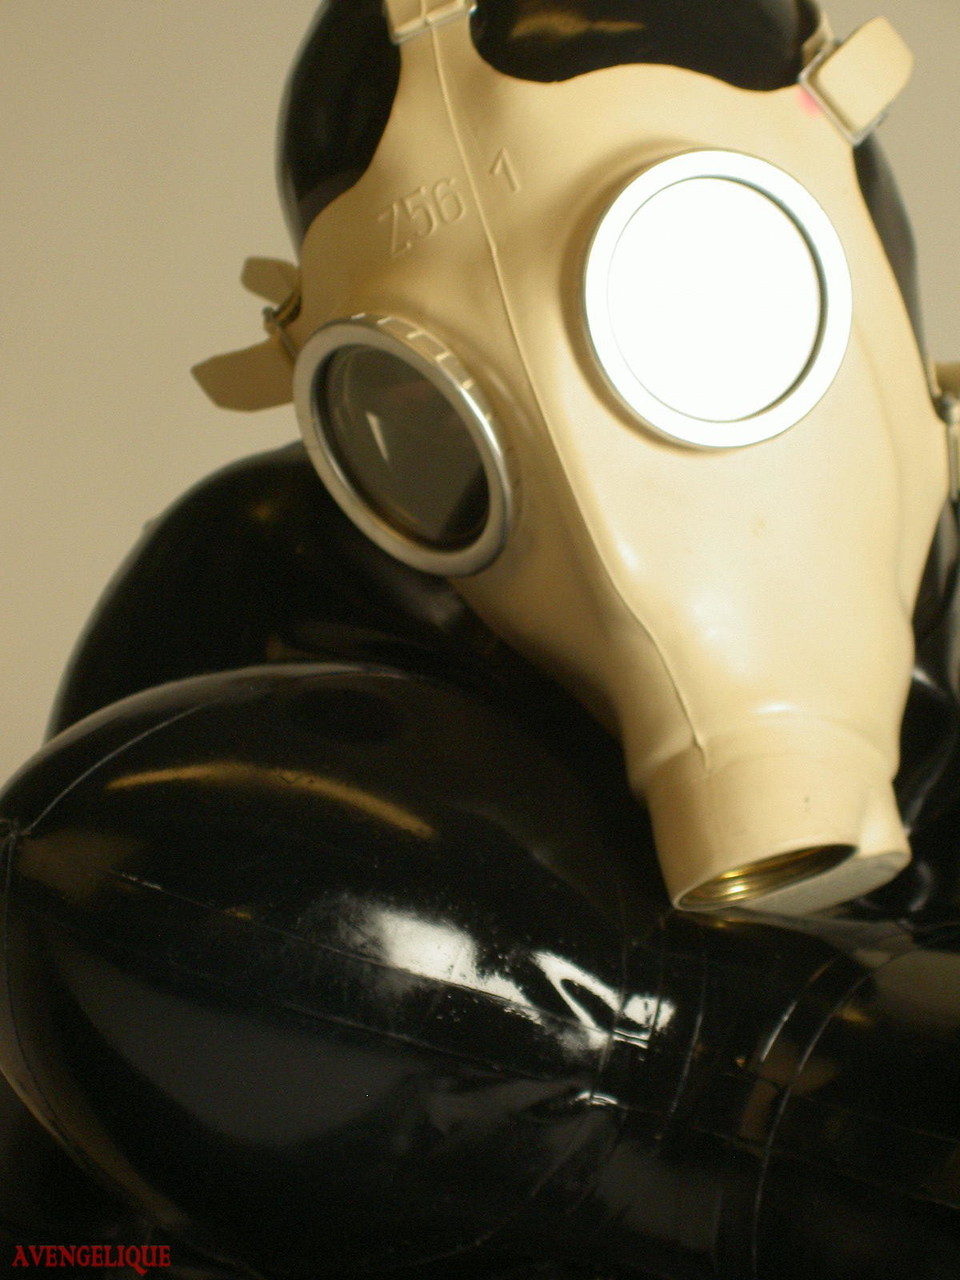 Solo model Darkwing Zero sports a gas mask while modelling latex clothing ポルノ写真 #428000072 | Rubber Tits Pics, Darkwing Zero, Latex, モバイルポルノ